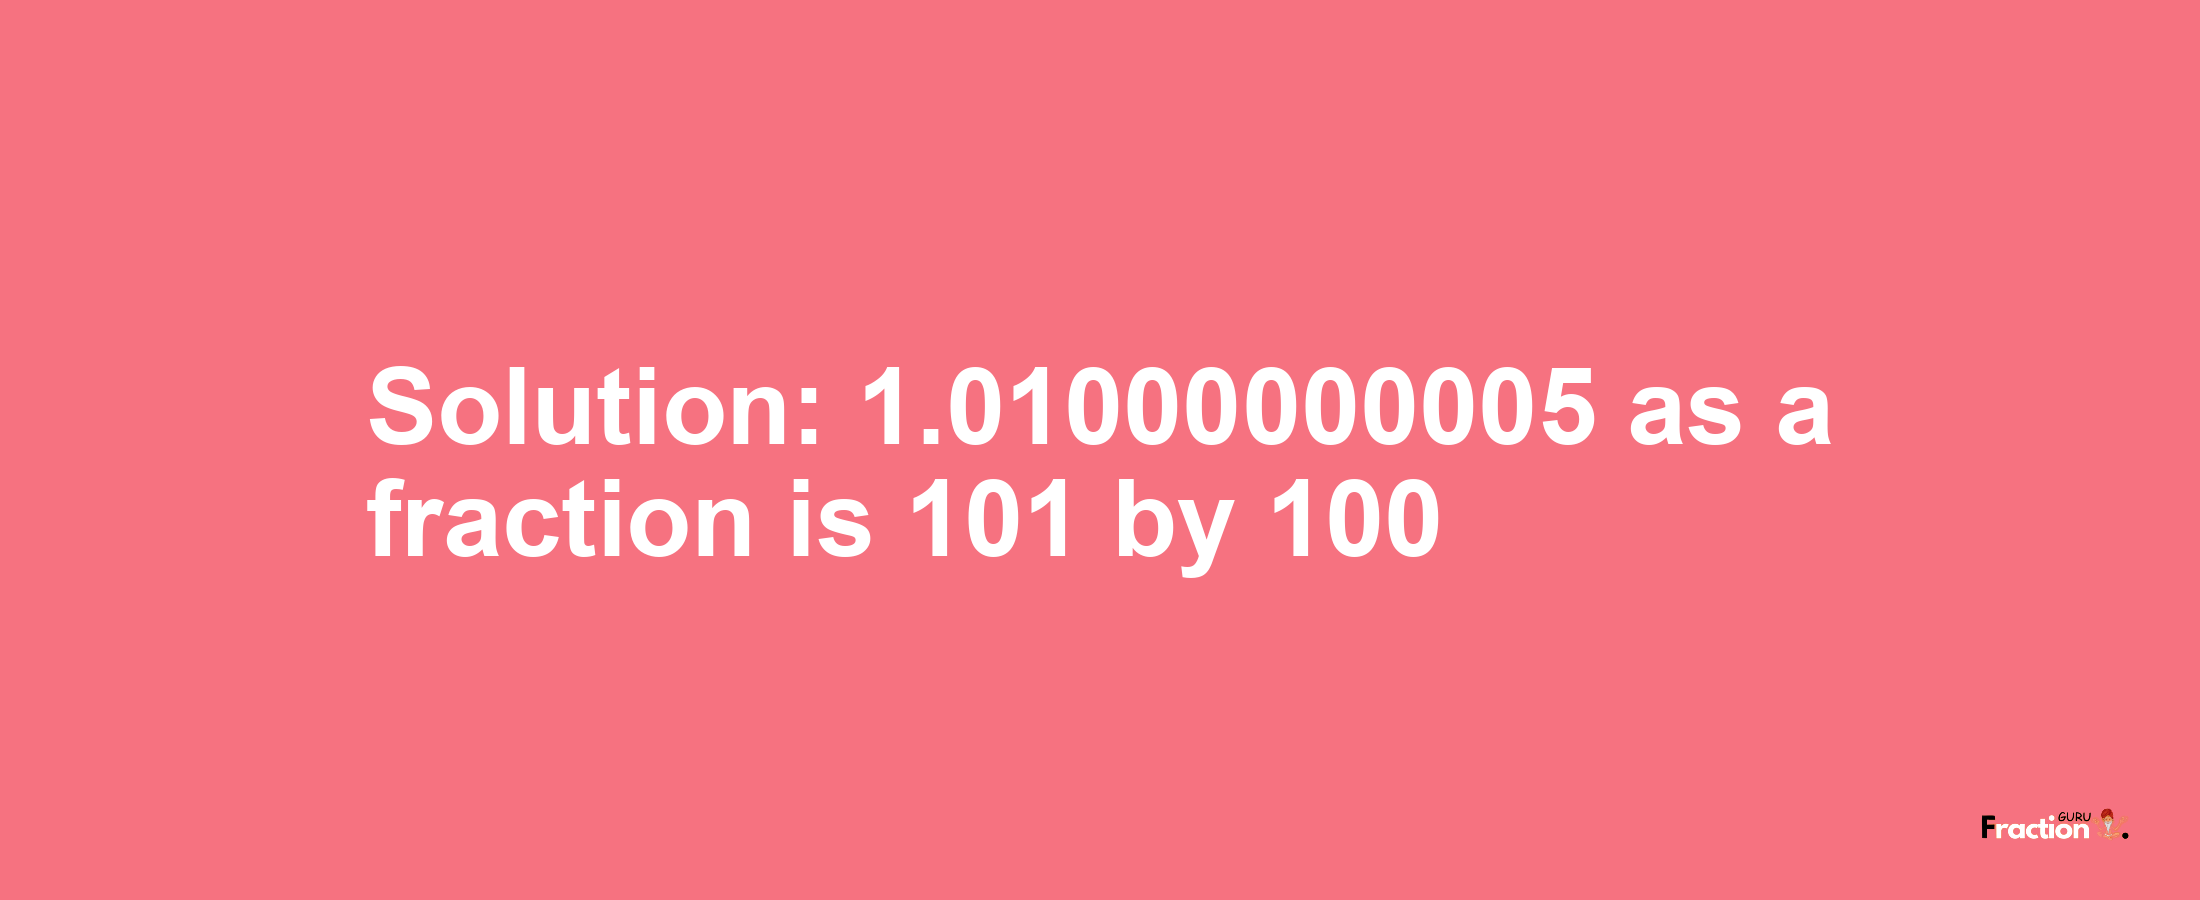 Solution:1.01000000005 as a fraction is 101/100